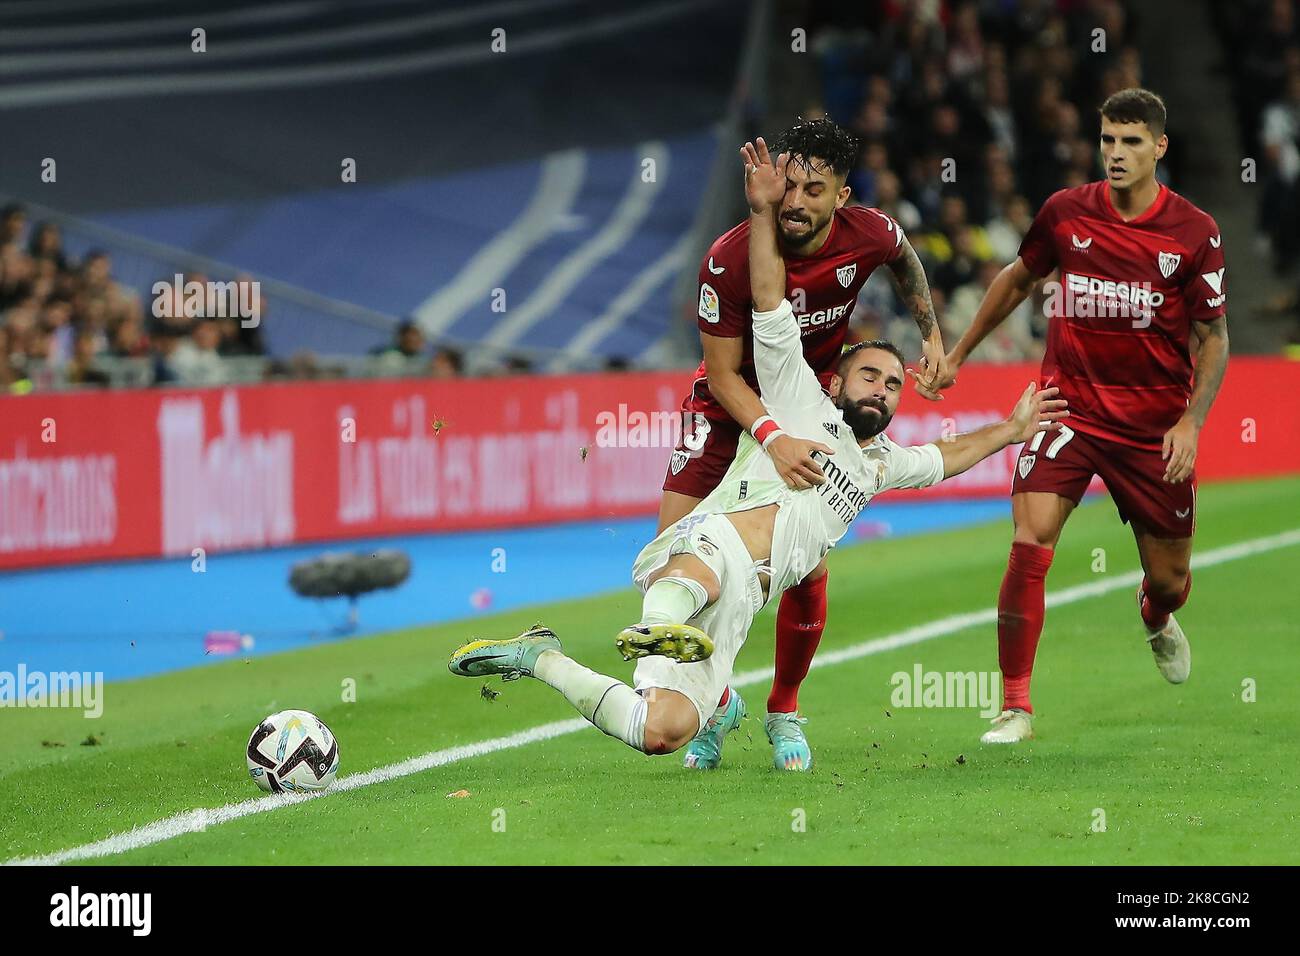 Madrid, Spain, on October 22, 2022. Real Madrid´s Daniel Carvajal and Sevilla´s Alex Telles in action during La Liga Match Day 11 between Real Madrid C.F. and Sevilla C.F. at Santiago Bernabeu Stadium in Madrid, Spain, on October 22, 2022 Credit: Edward F. Peters/Alamy Live News Stock Photo